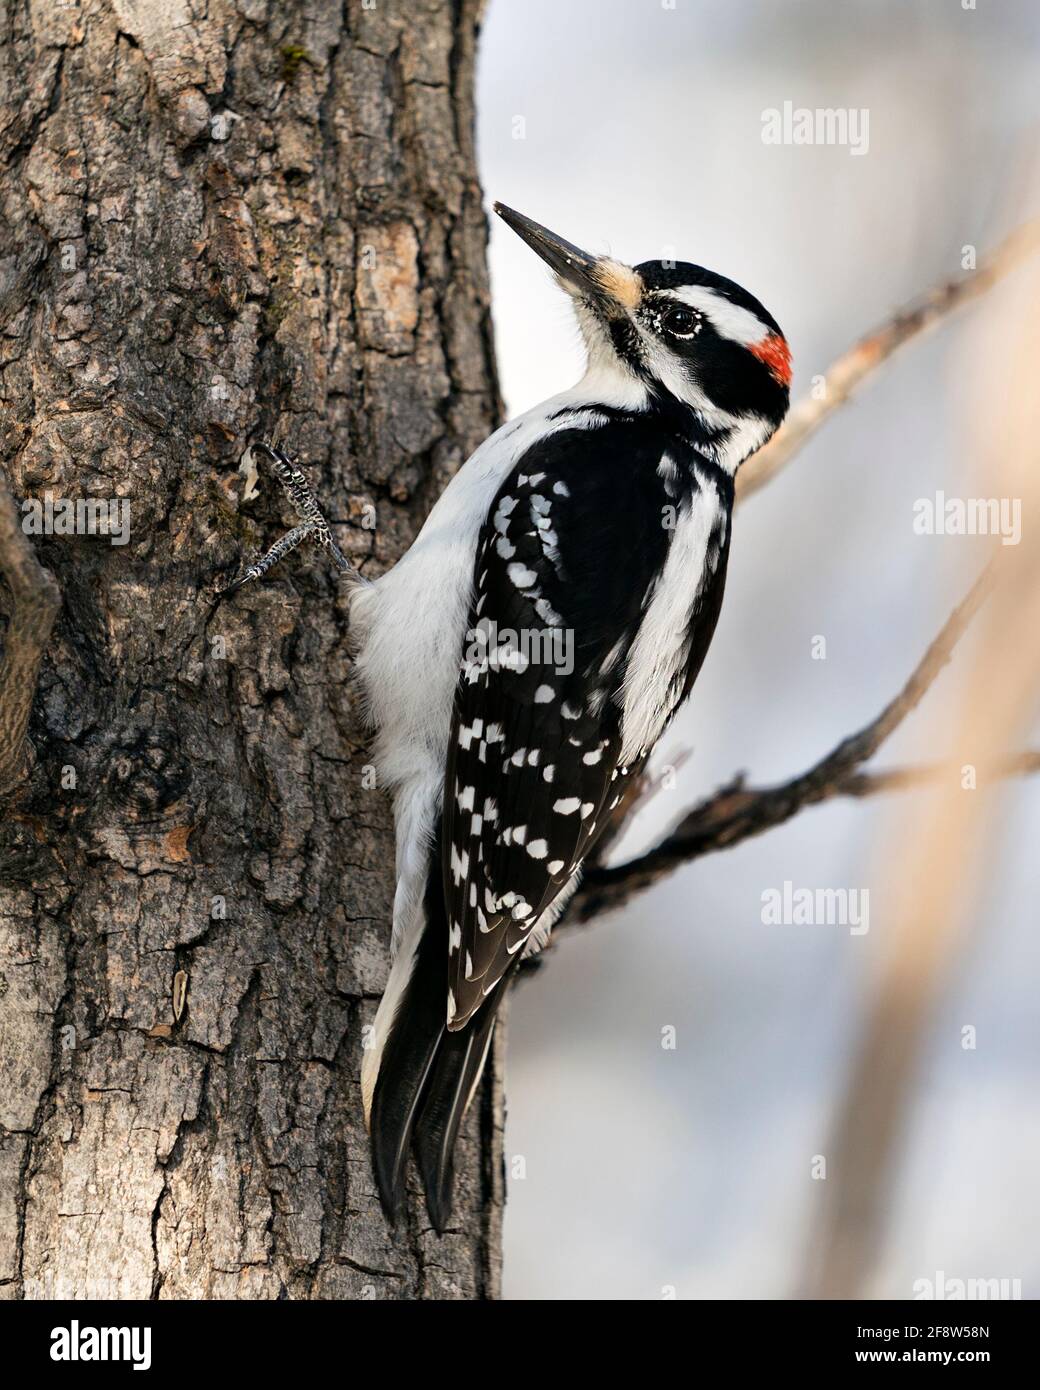 Woodpecker male close-up profile view climbing tree trunk and displaying feather plumage in its habitat in the forest with a blur background. Stock Photo